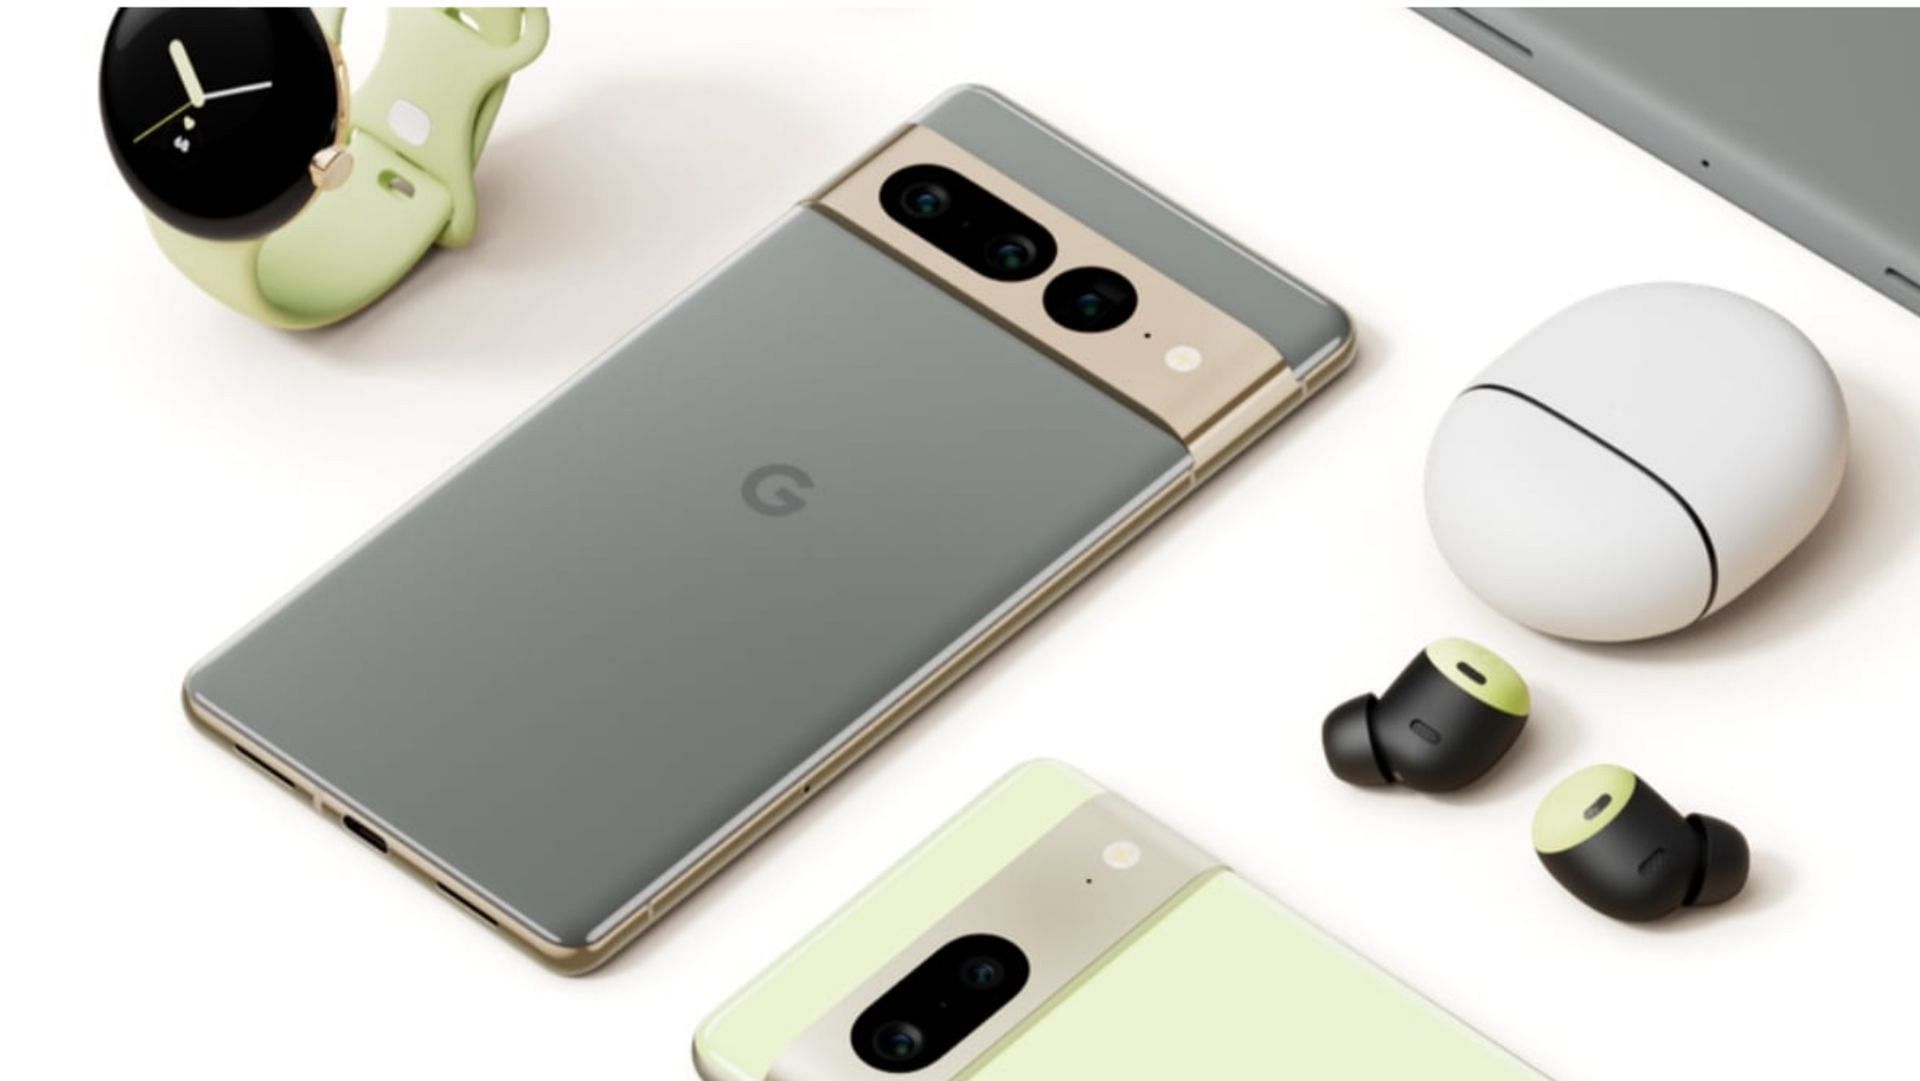 Google has now officially launched the 7th generation of its flagship devices (Image via Google)